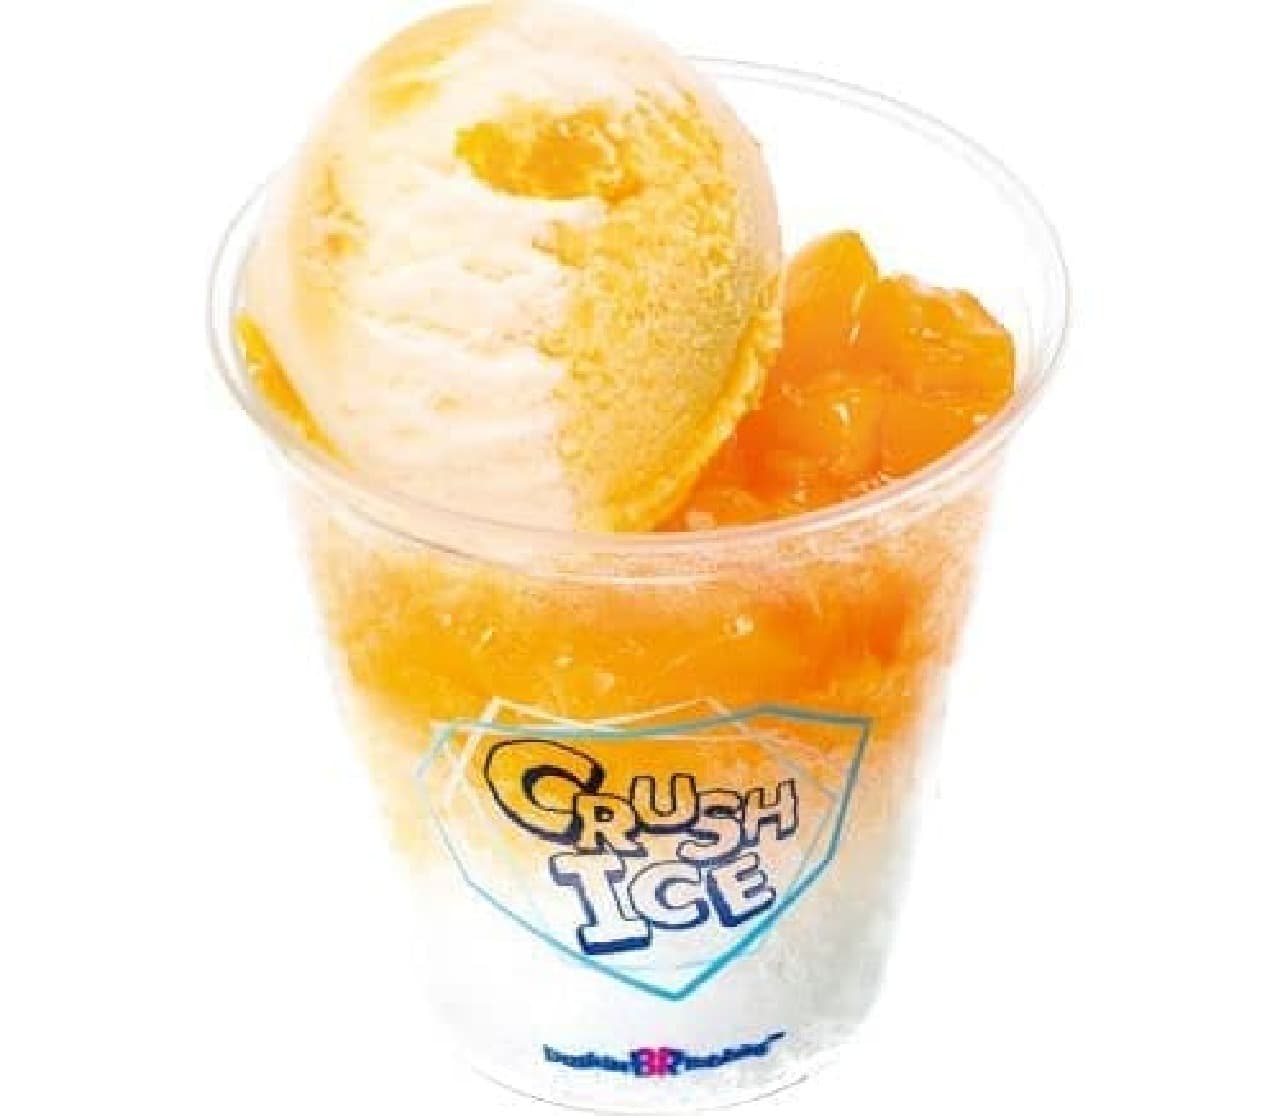 "Melting peach" is shaved ice with thick and soft peach pulp.